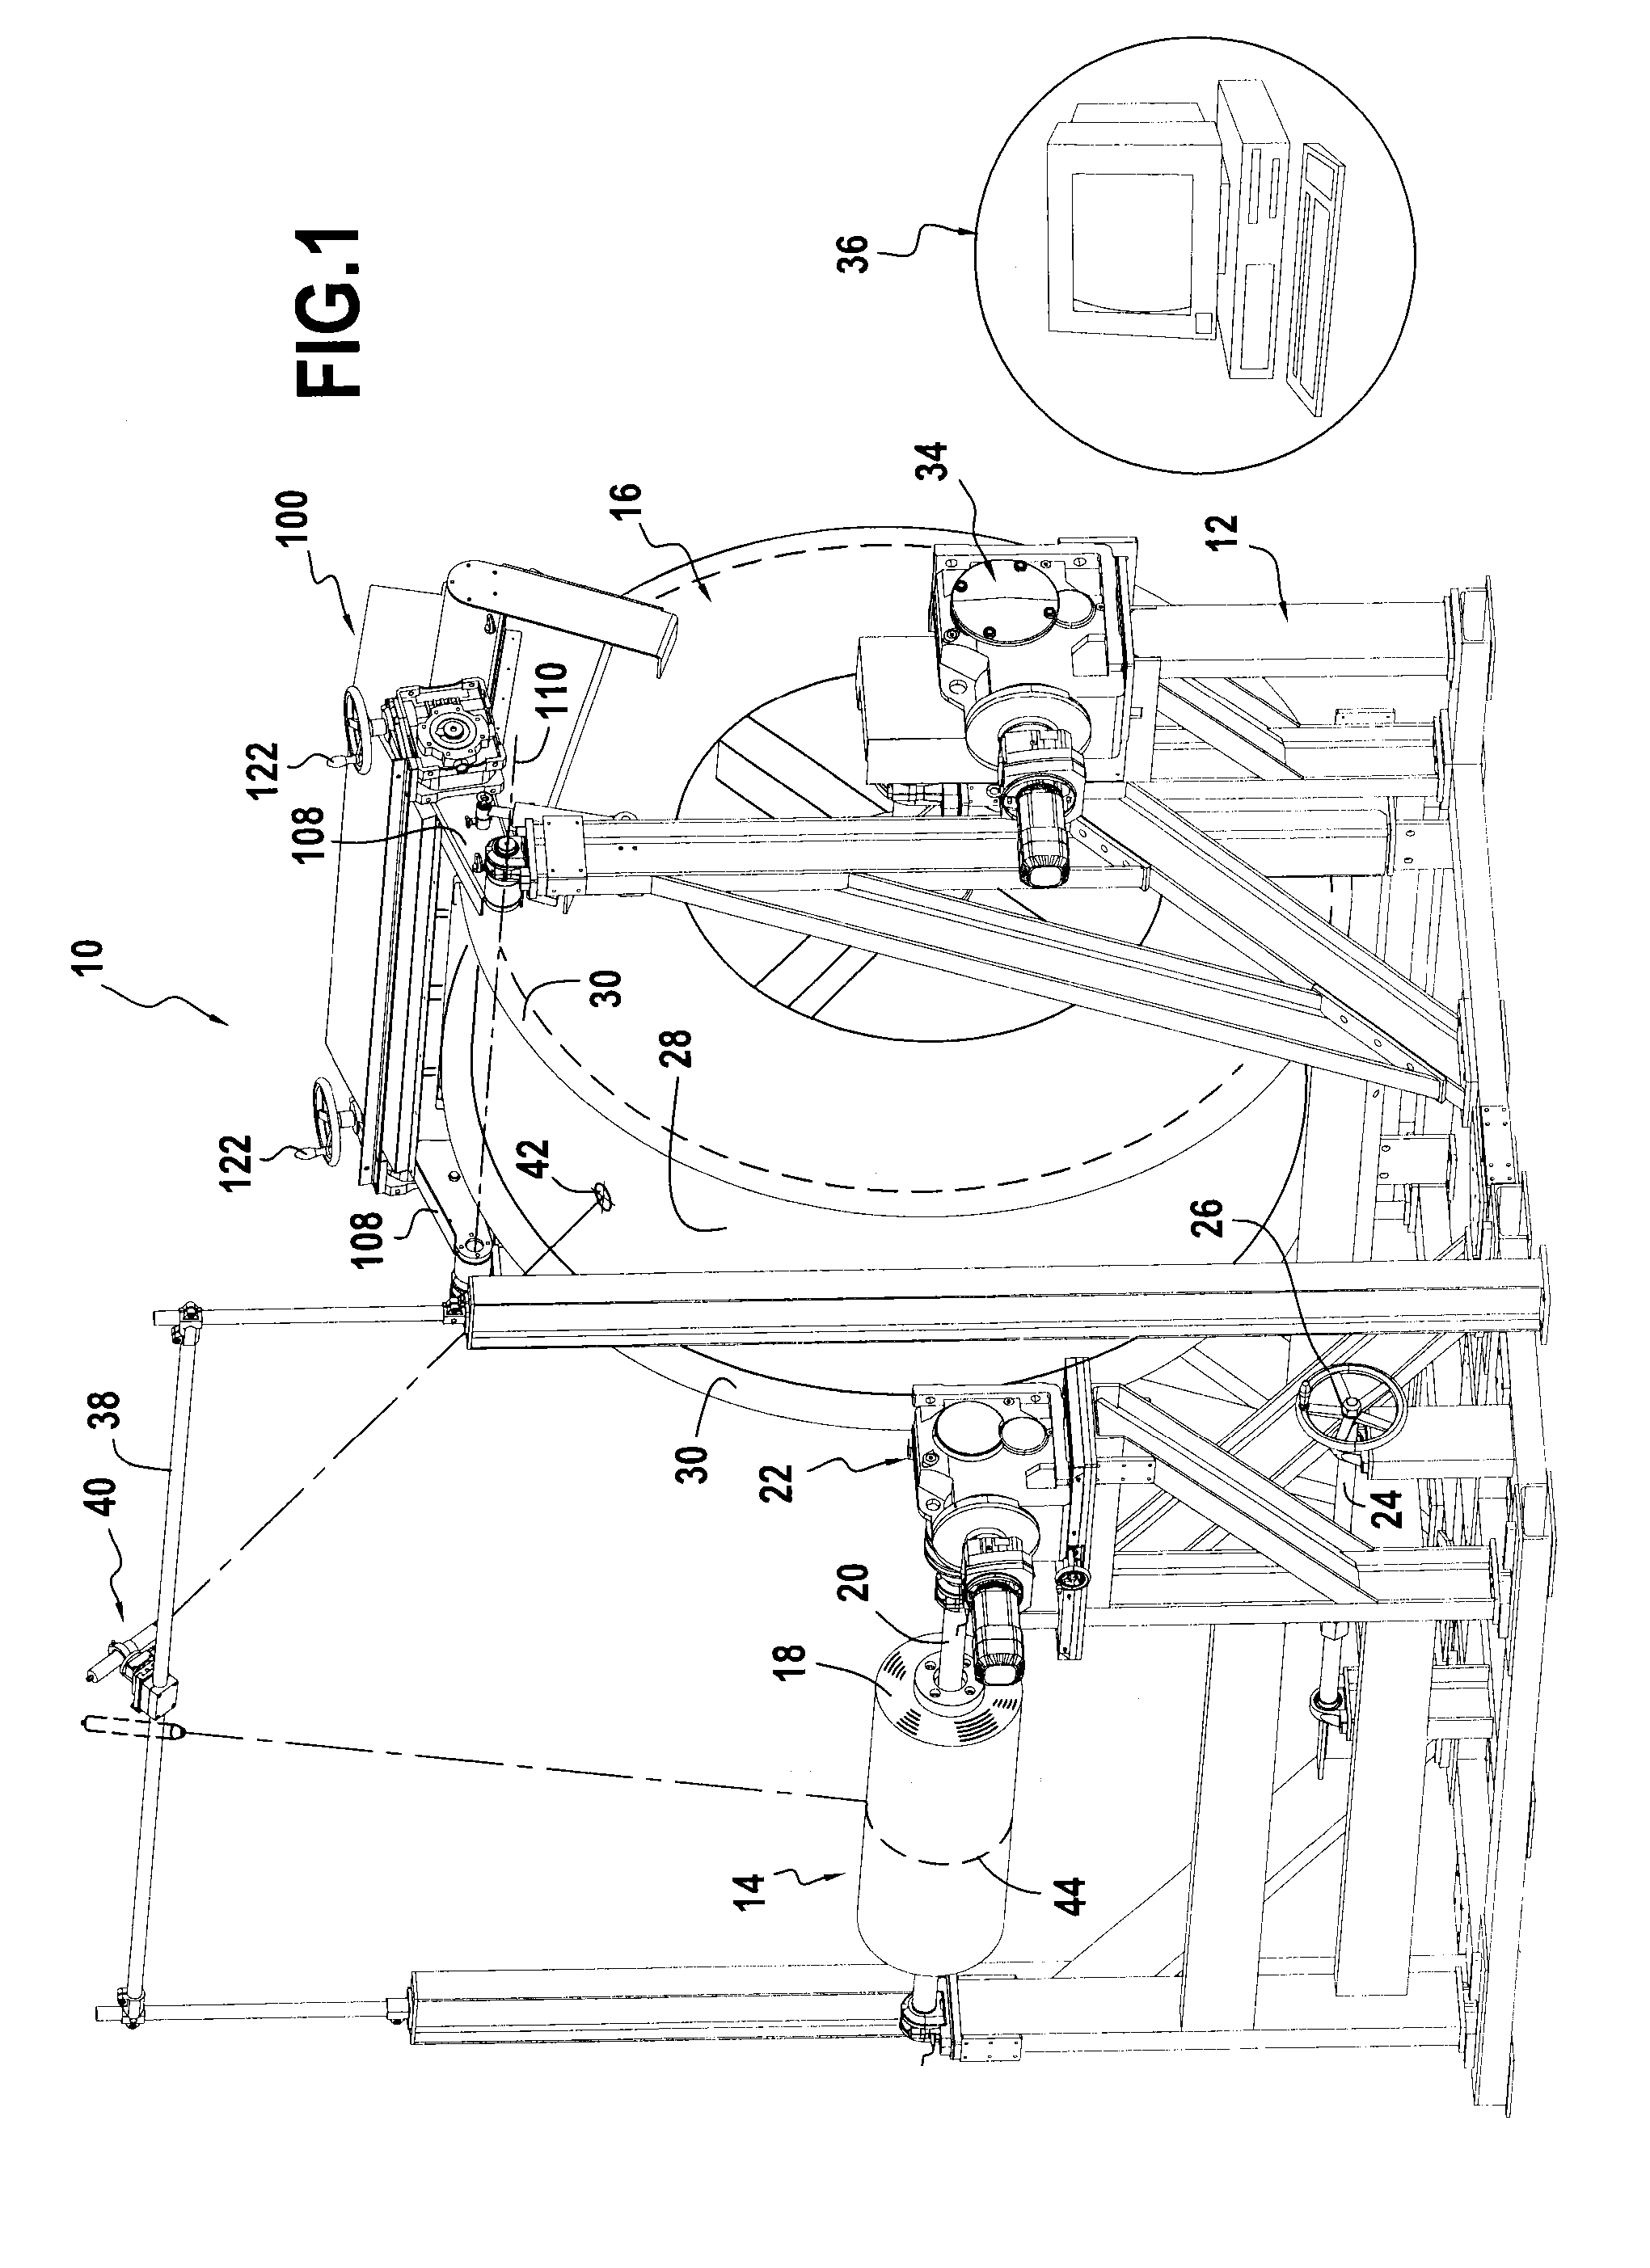 Compacting device for a machine for winding a fibrous texture onto an impregnation mandrel